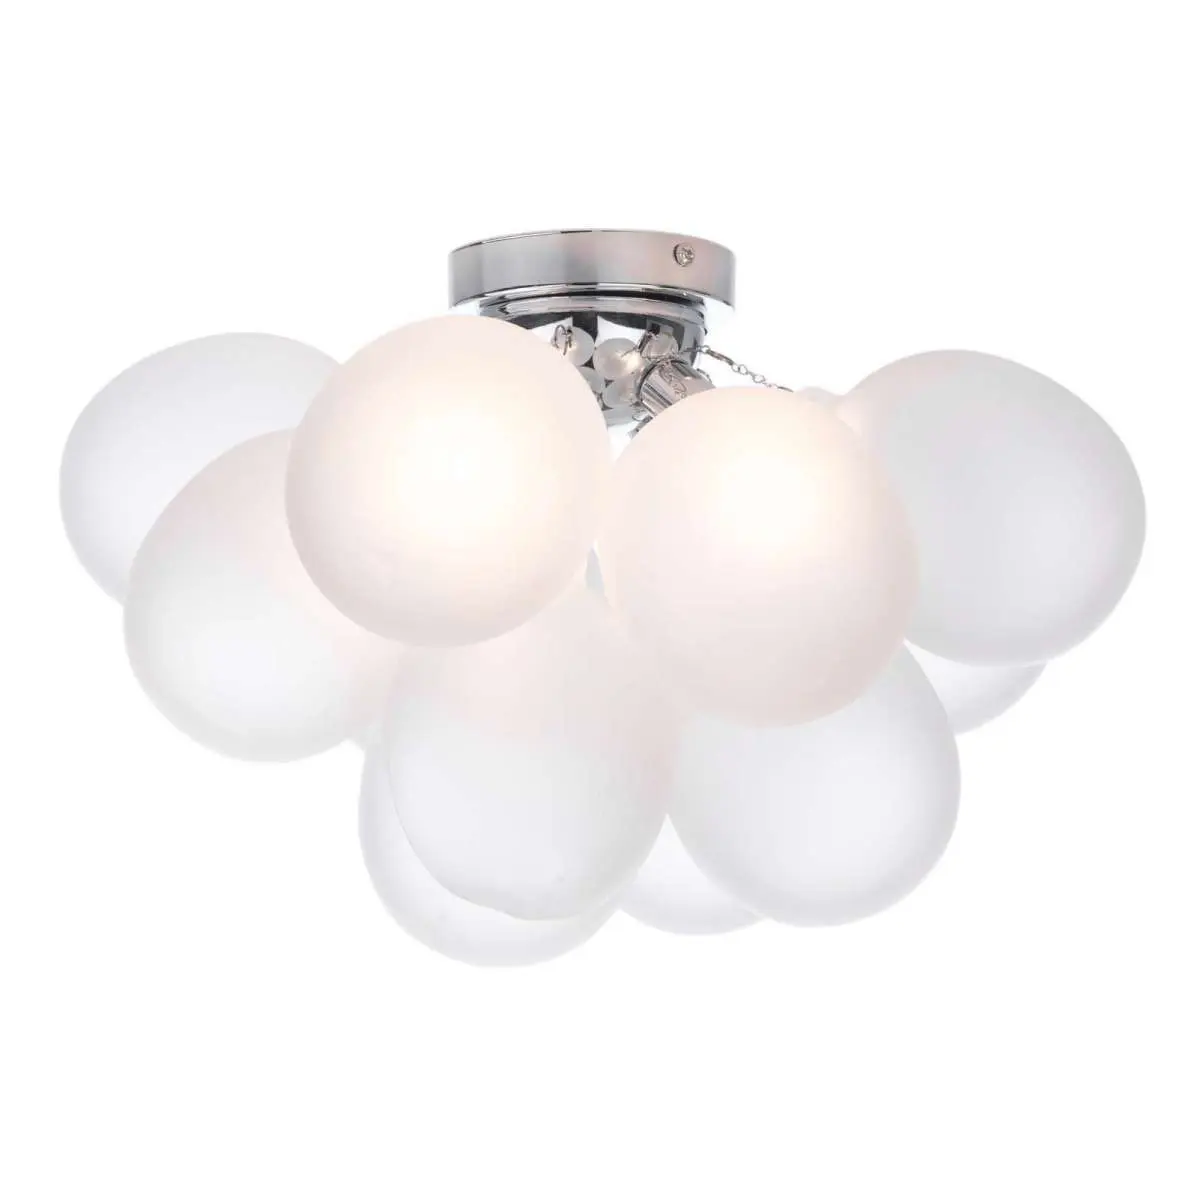 Bubbles 4 Light Flush Fitting in Polished Chrome & Frosted Glass